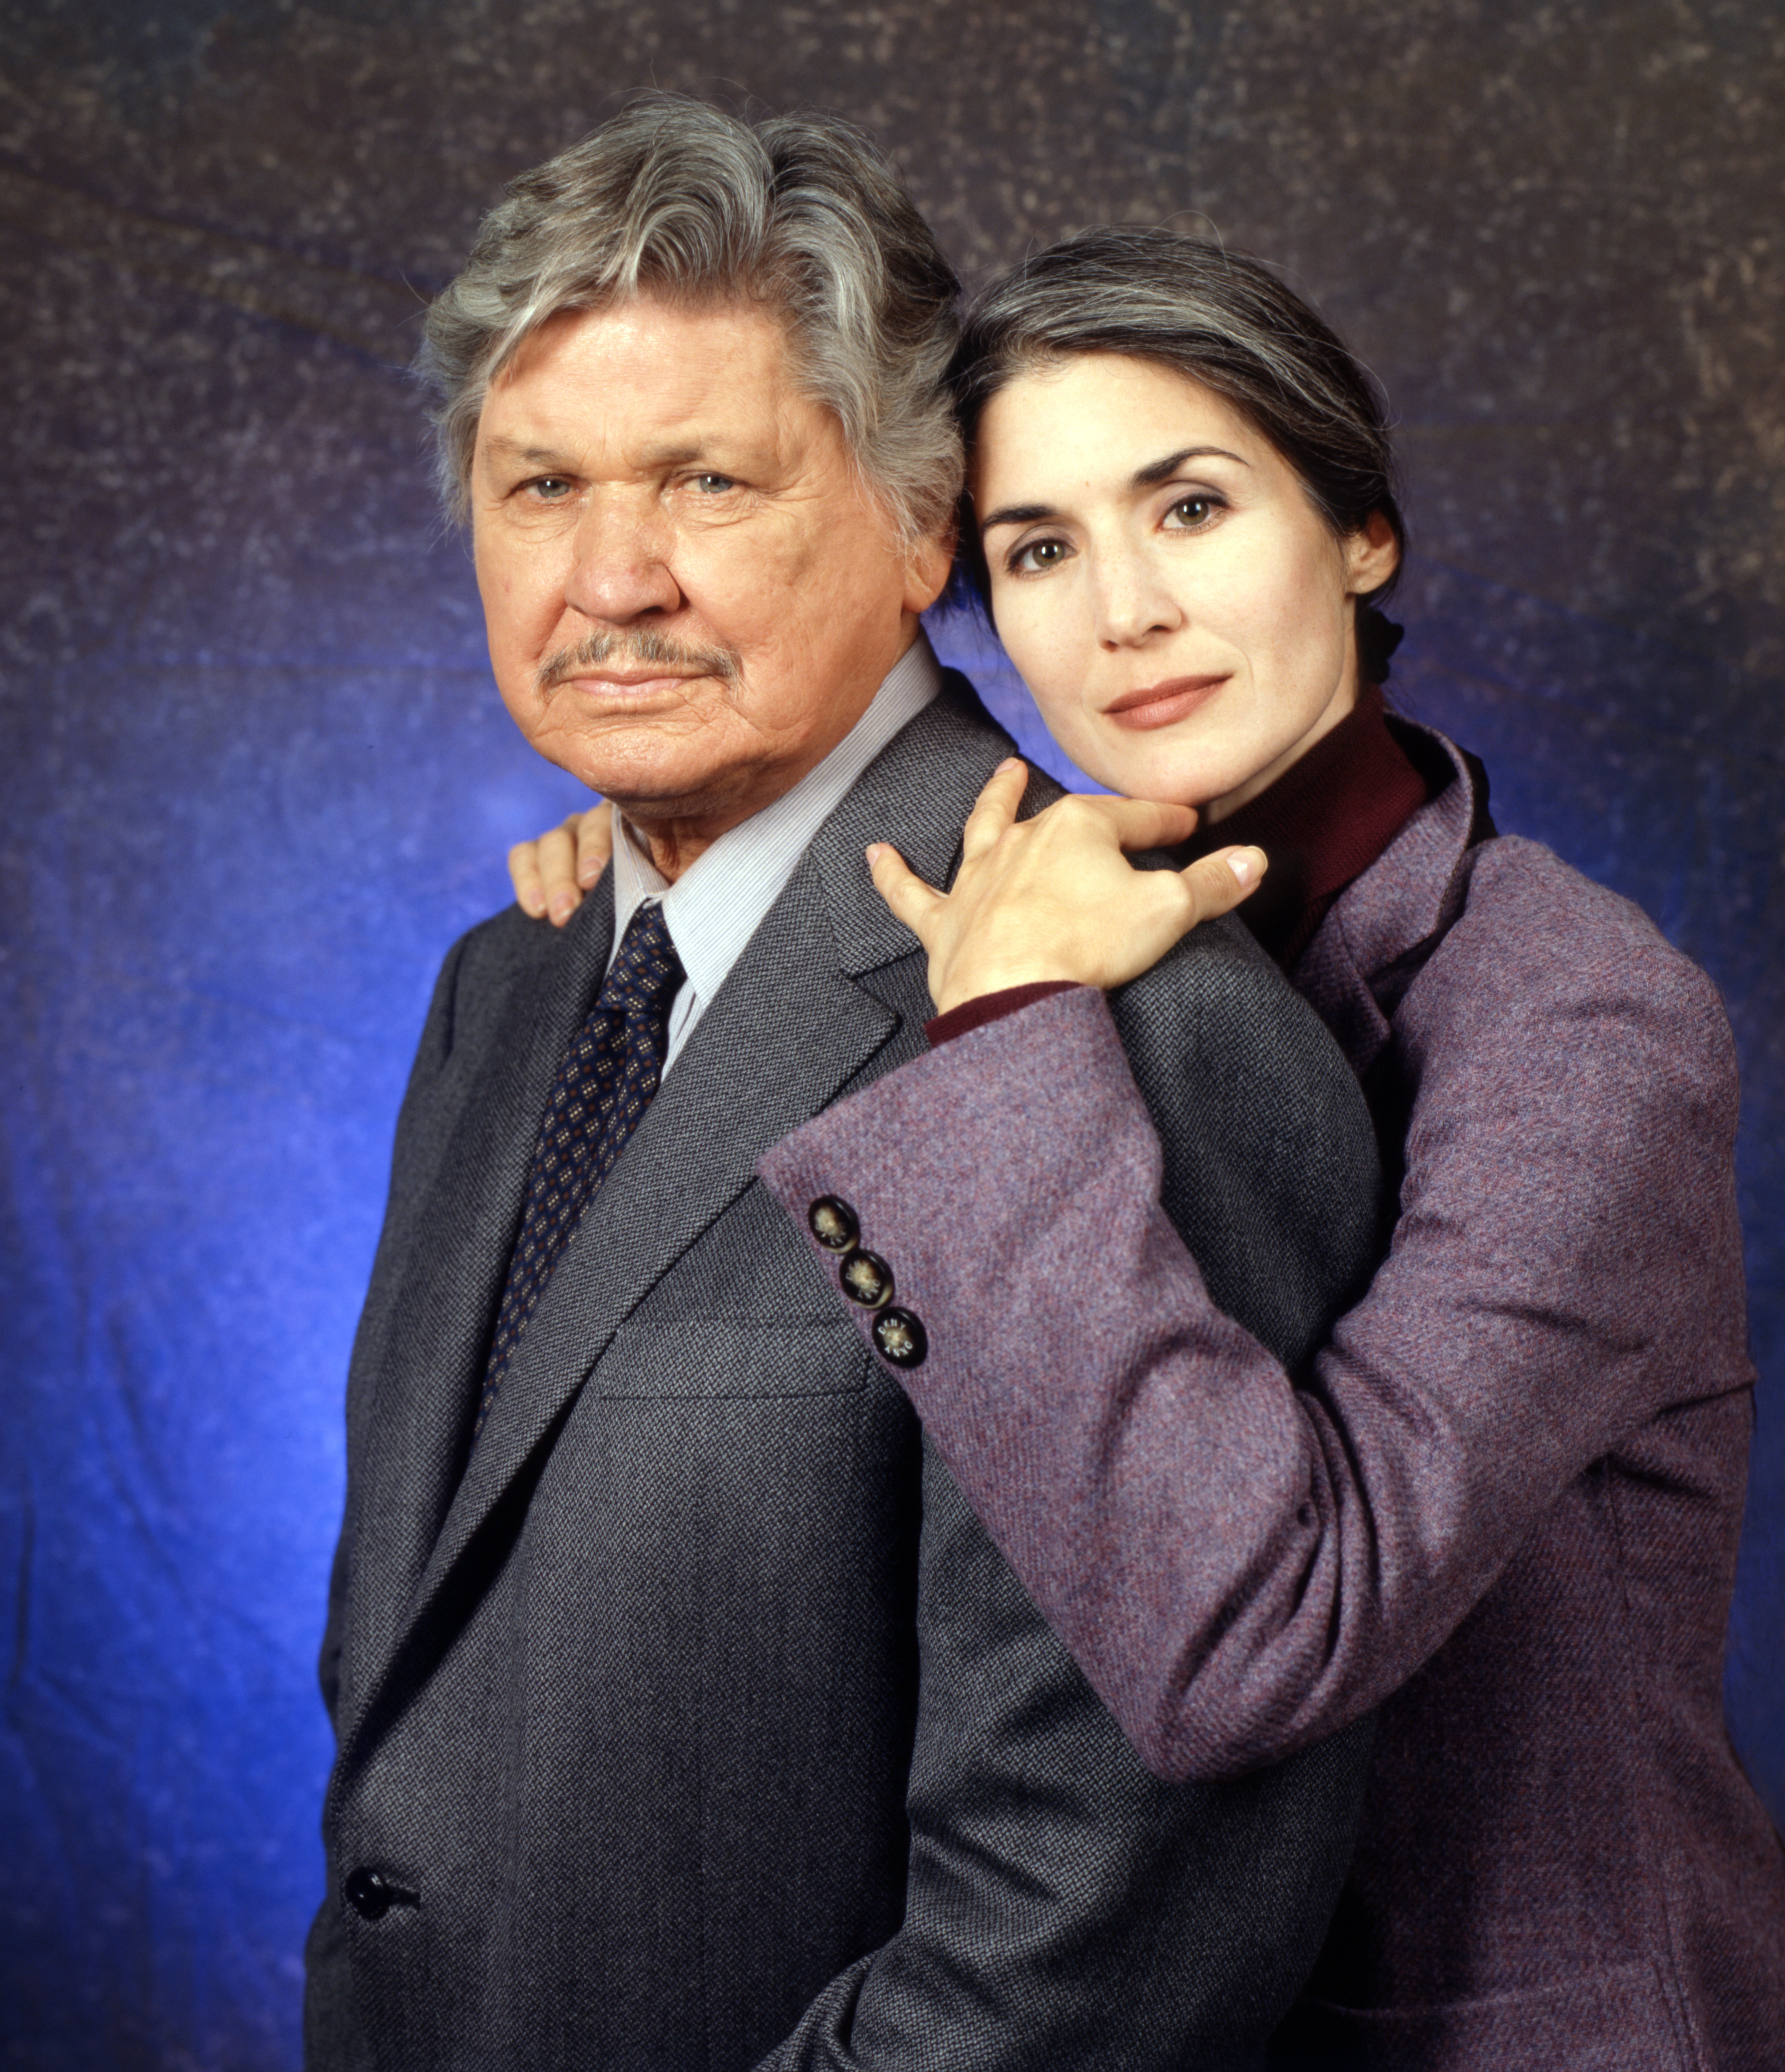 Charles Bronson as Paul Fein pictured with his wife, actress Kim Weeks as Anna Meyer in "Breach of Faith : A Family of Cops II," aired on February 2, 1997. / Source: Getty Images